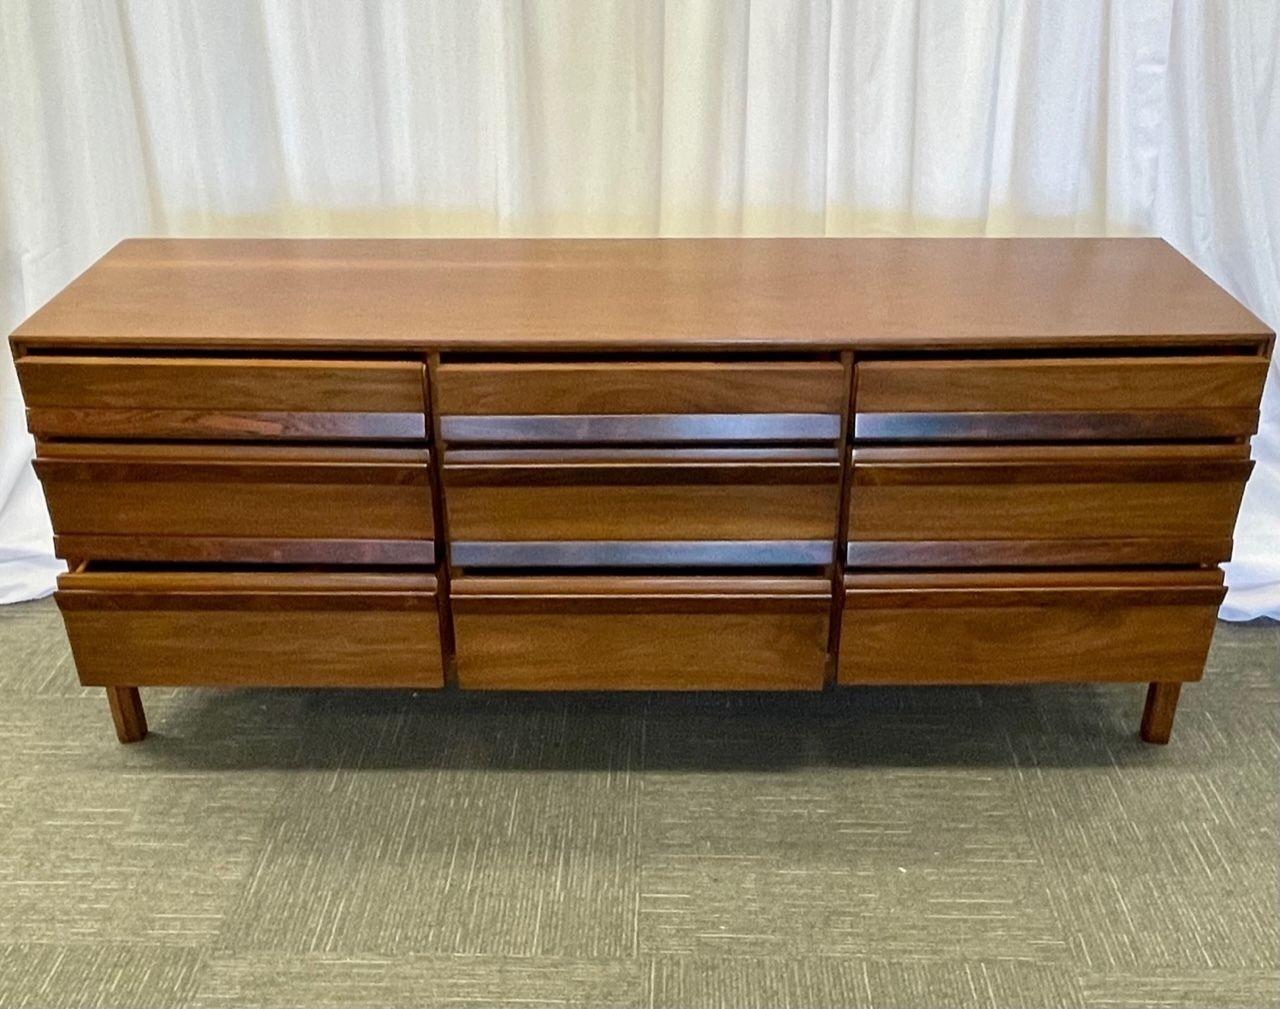 Mid-Century Modern low sideboard / dresser, walnut, Rosewood, American, 1950s
 
Fully refinished Mid-Century Modern dresser, sideboard featuring walnut and rosewood veneers and nine dovetailed drawers all having rosewood drawer pulls. Stamped on